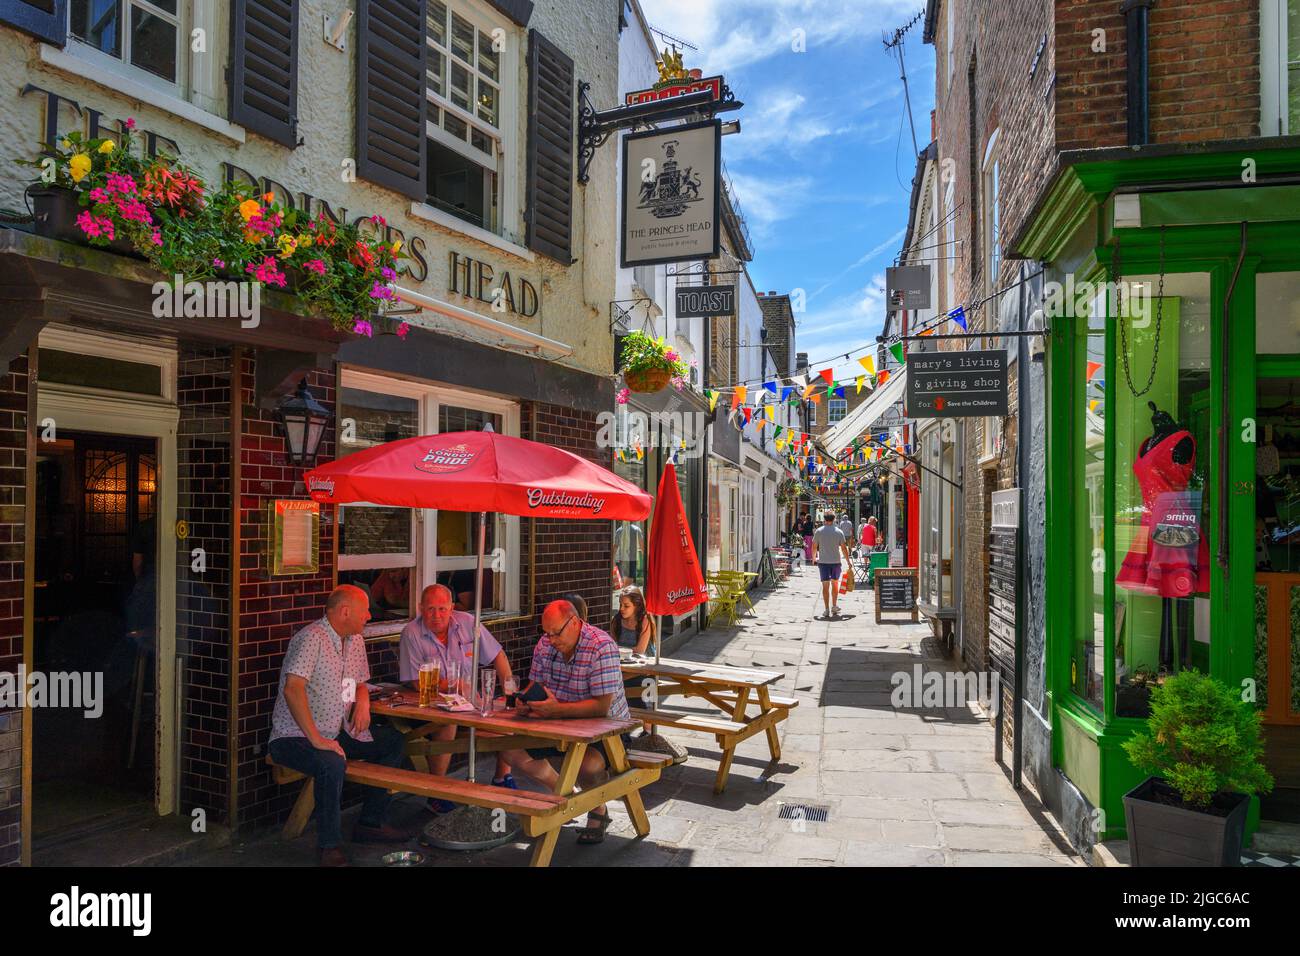 Pub and shops on Paved Court, Richmond upon Thames, London, England, UK Stock Photo